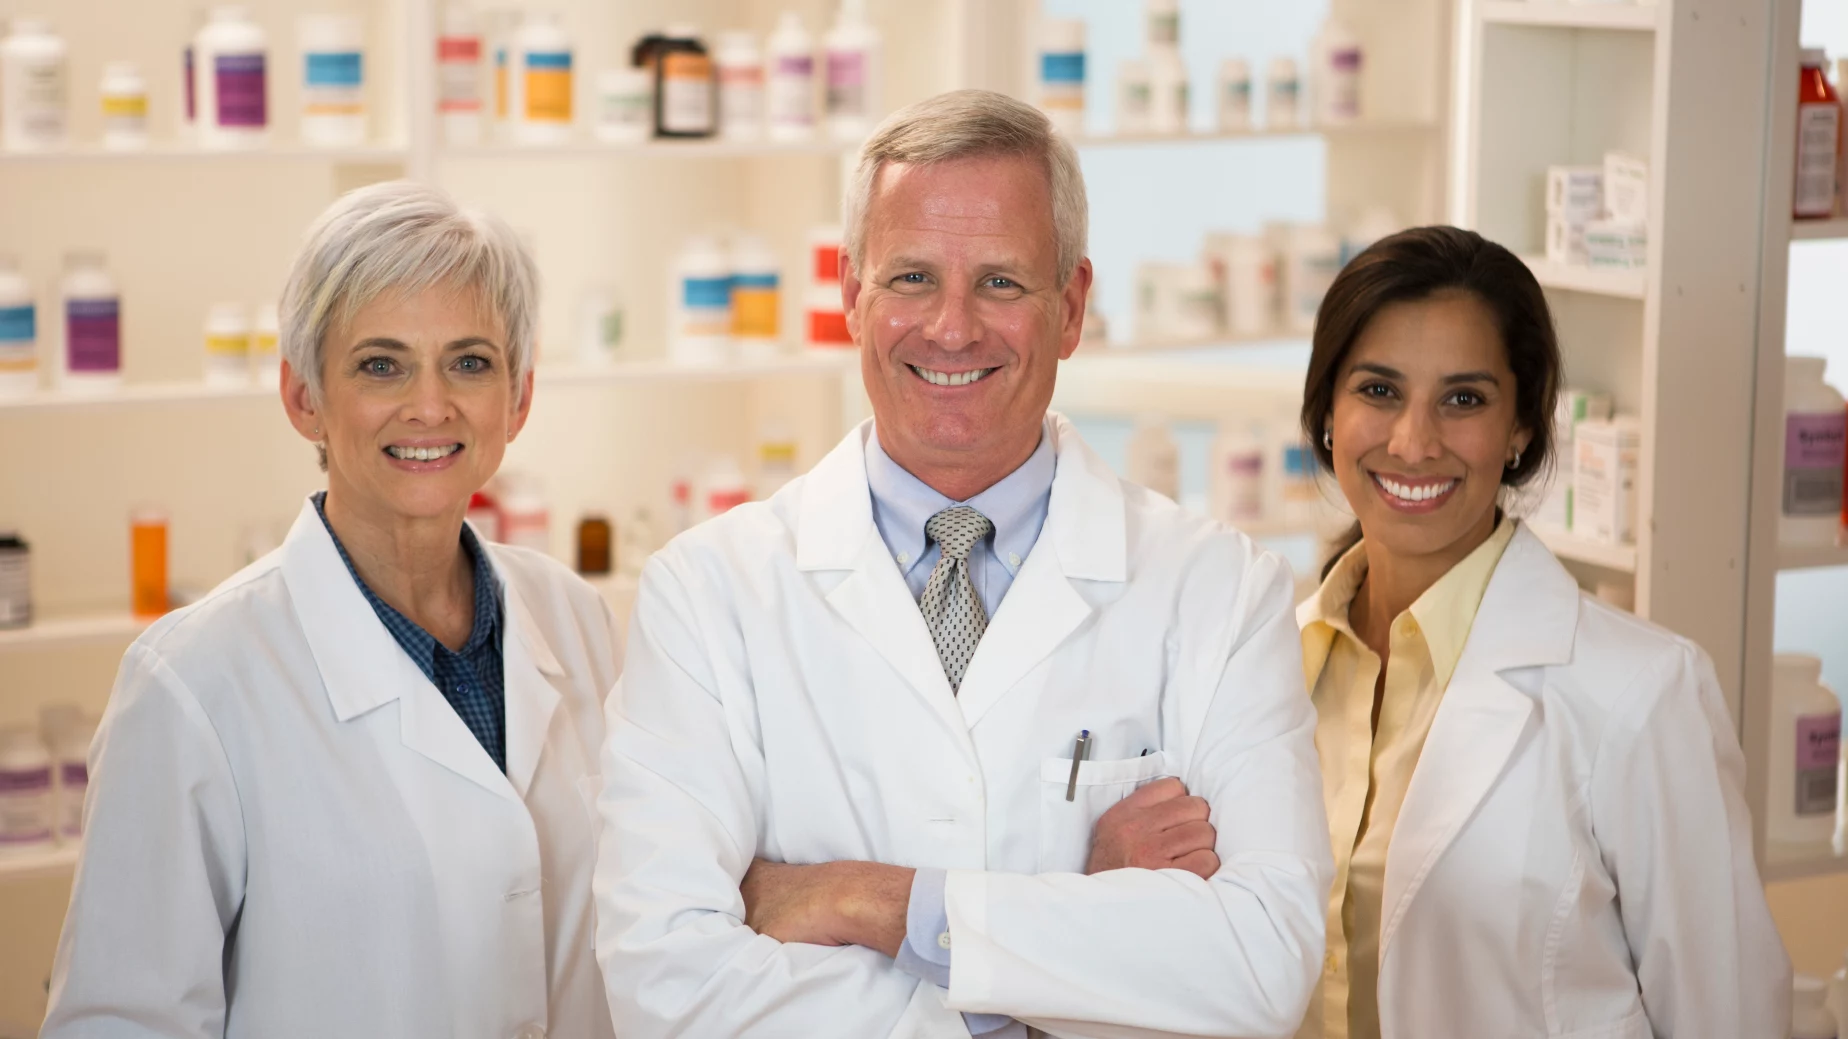 PREP Act: Pharmacists Can Administer COVID-19 Therapeutics